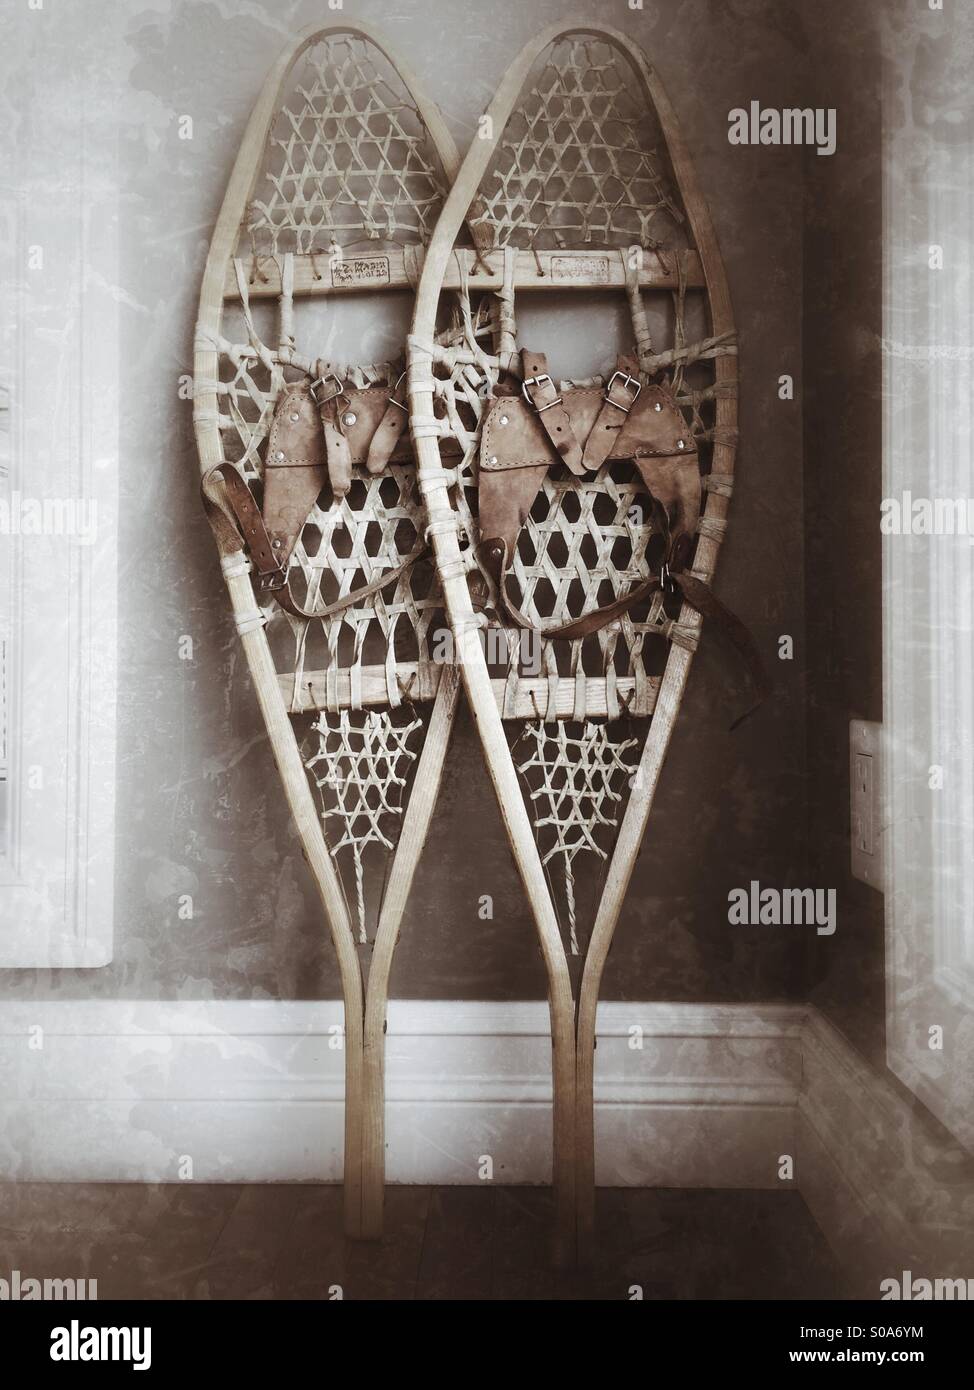 Vintage wooden snowshoes with leather bindings. Stock Photo